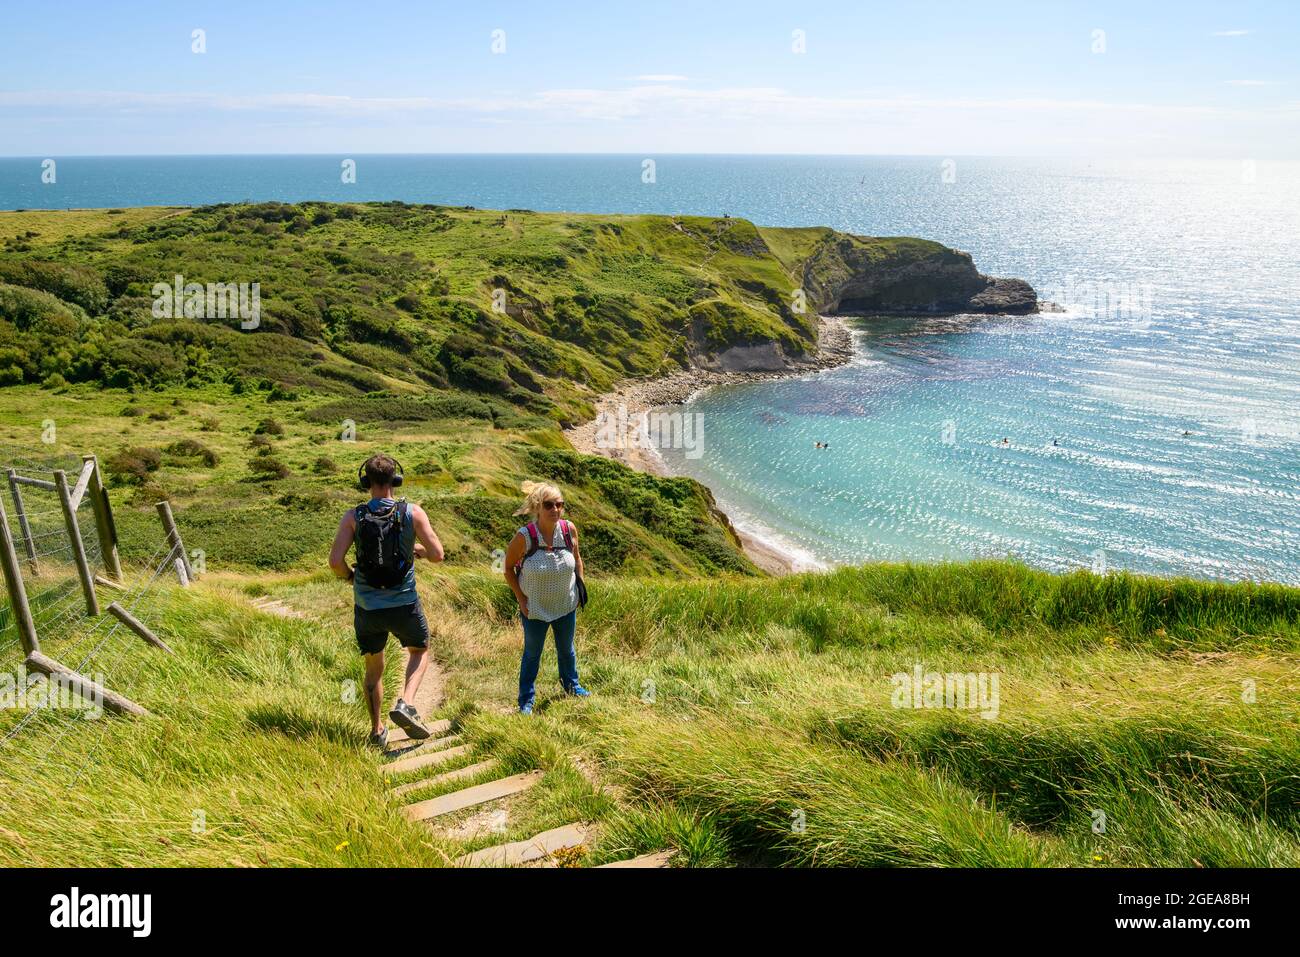 Man running down steep hill passing woman walking up hill on a steep section of the South West Coast Path at Lulworth Cove, West Lulworth, Dorset, UK Stock Photo